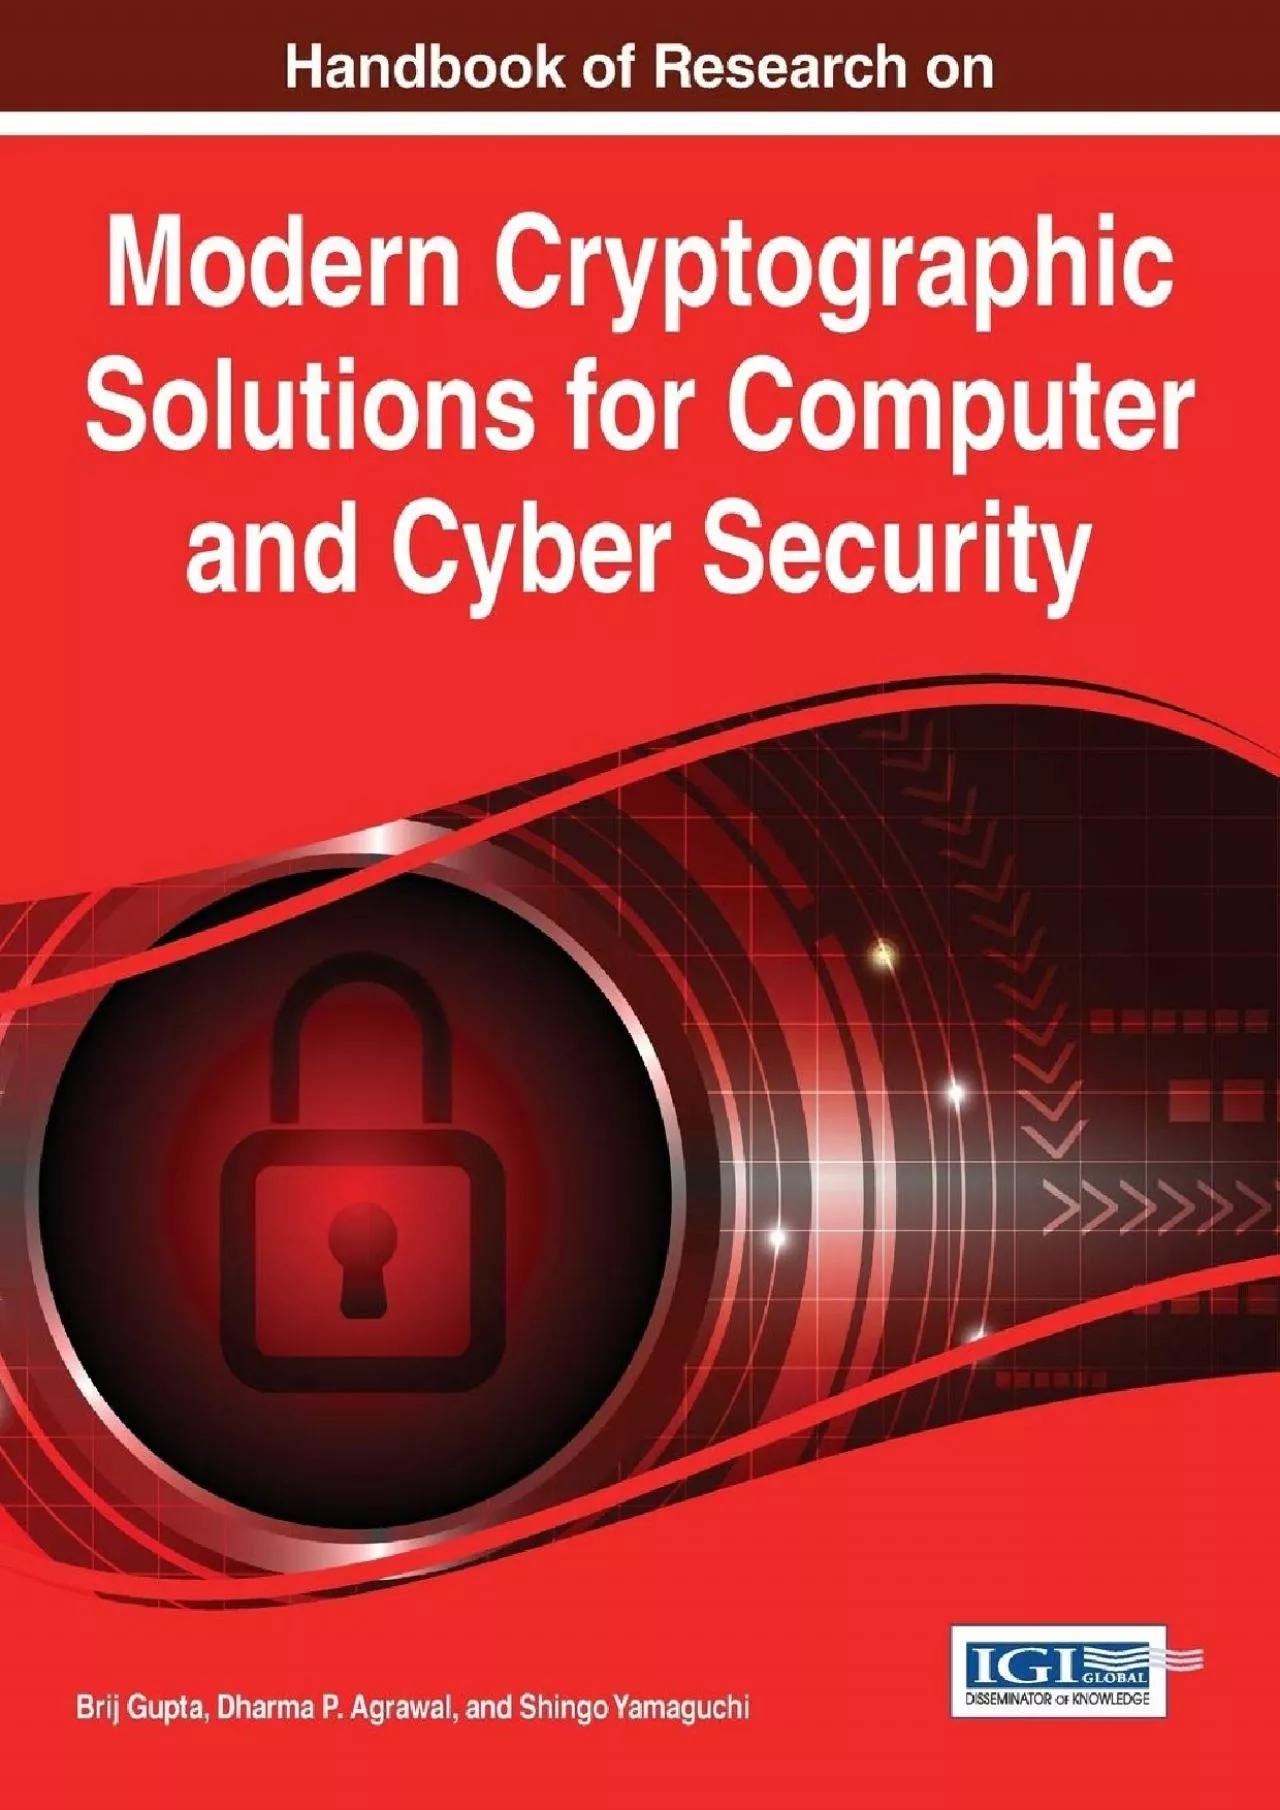 (BOOK)-Handbook of Research on Modern Cryptographic Solutions for Computer and Cyber Security